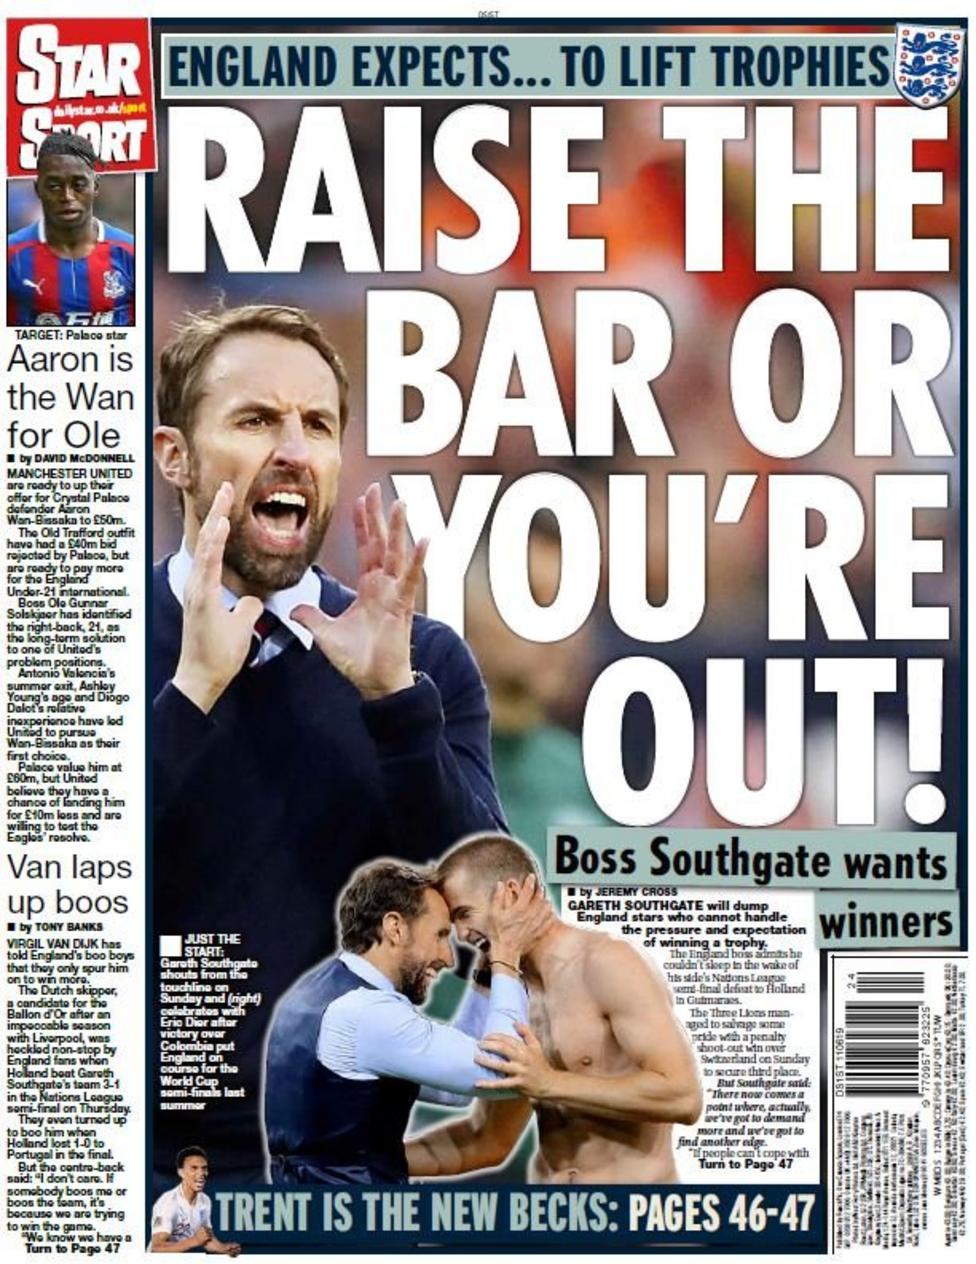 Tuesday's Star back page